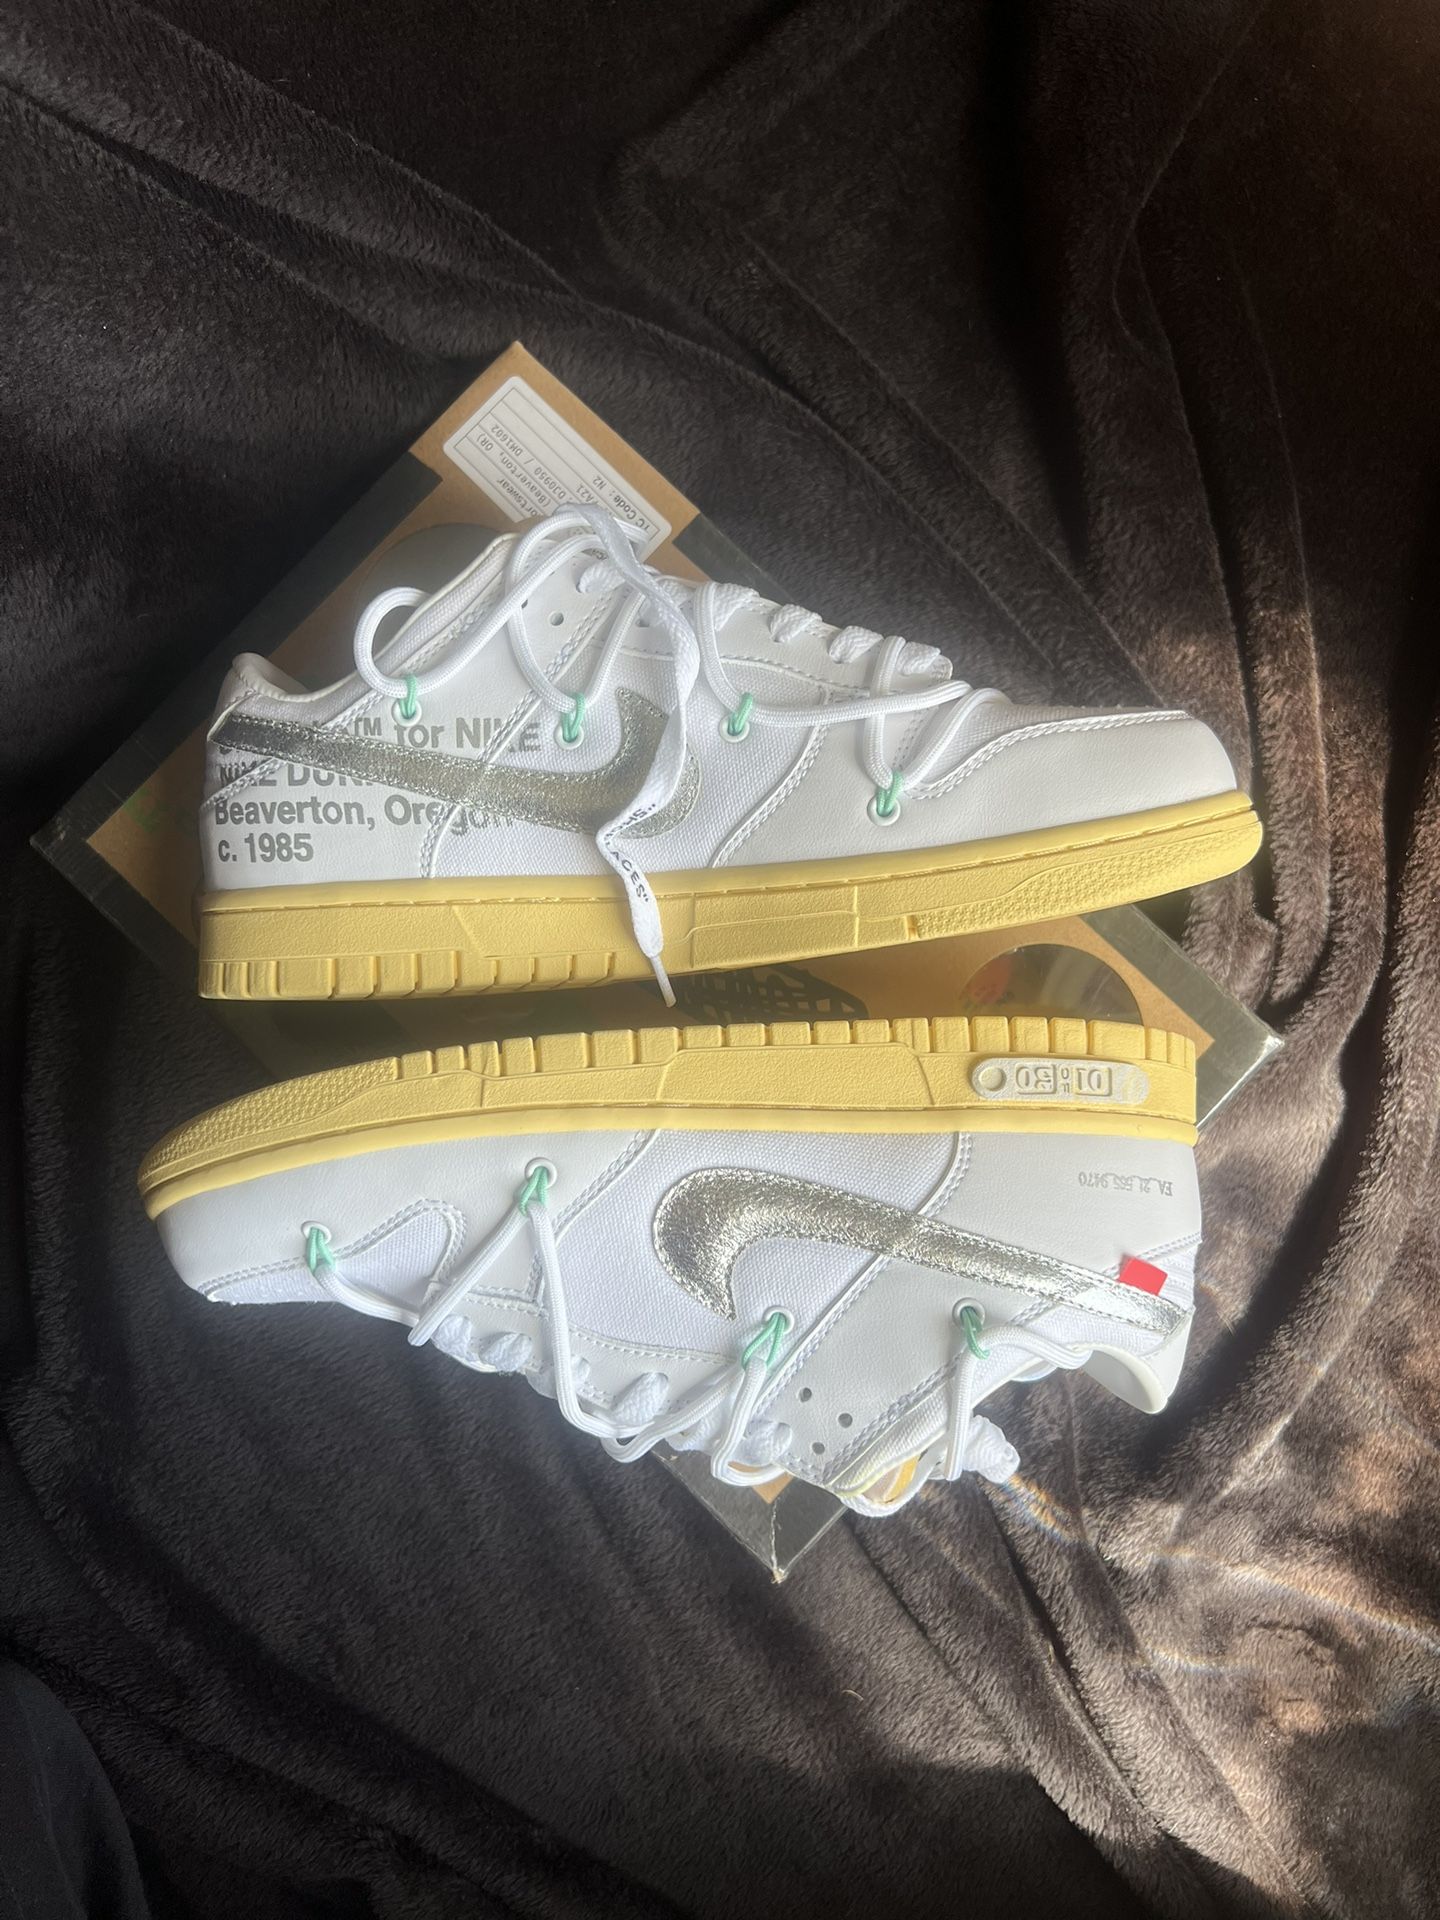 Nike Dunk Low OffWhite size 10